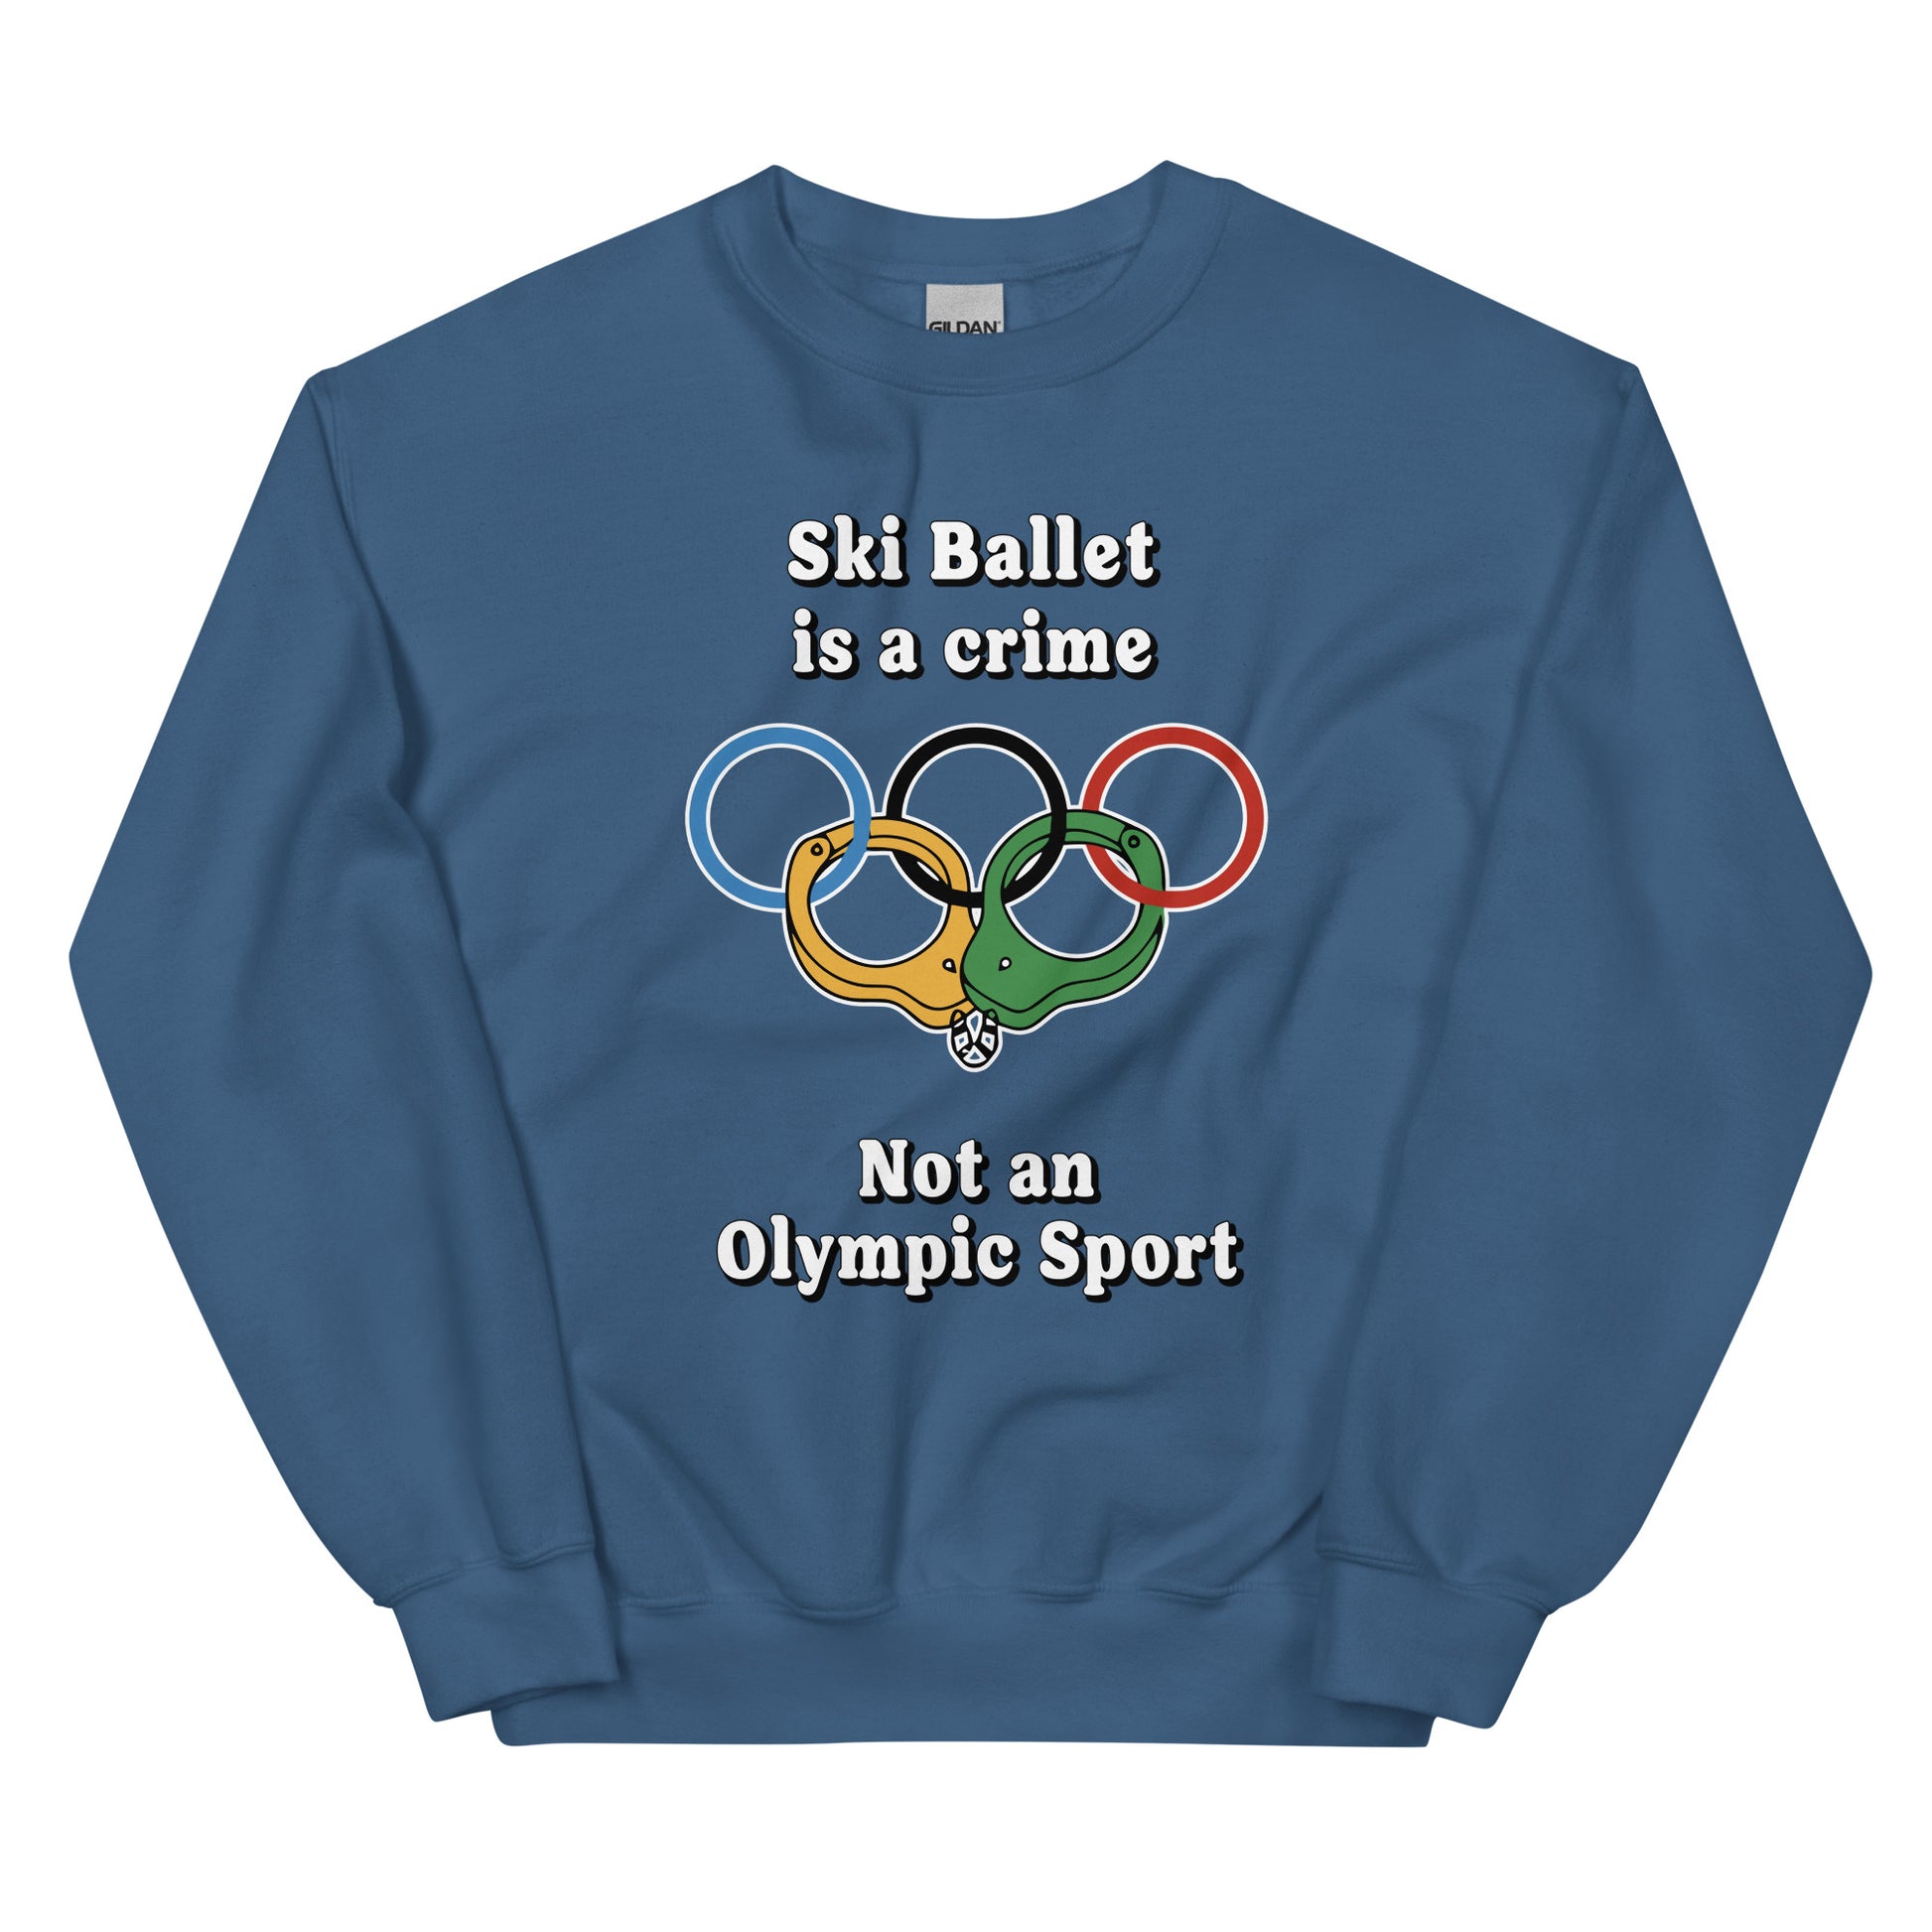 Ski ballet is a crime not an olympic sport design printed on crewneck sweatshirt by Whistler Shirts